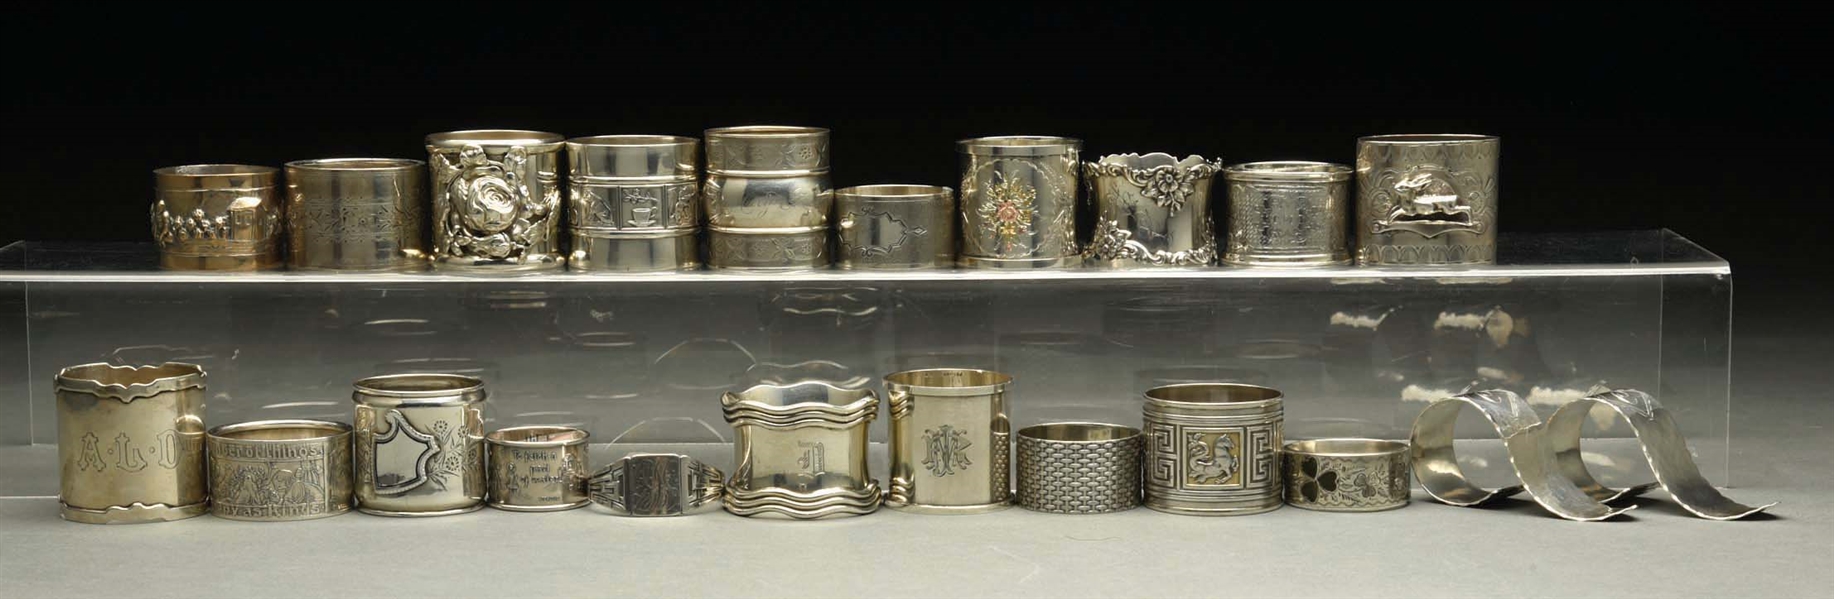 LOT OF 22: STERLING SILVER NAPKIN RINGS. 